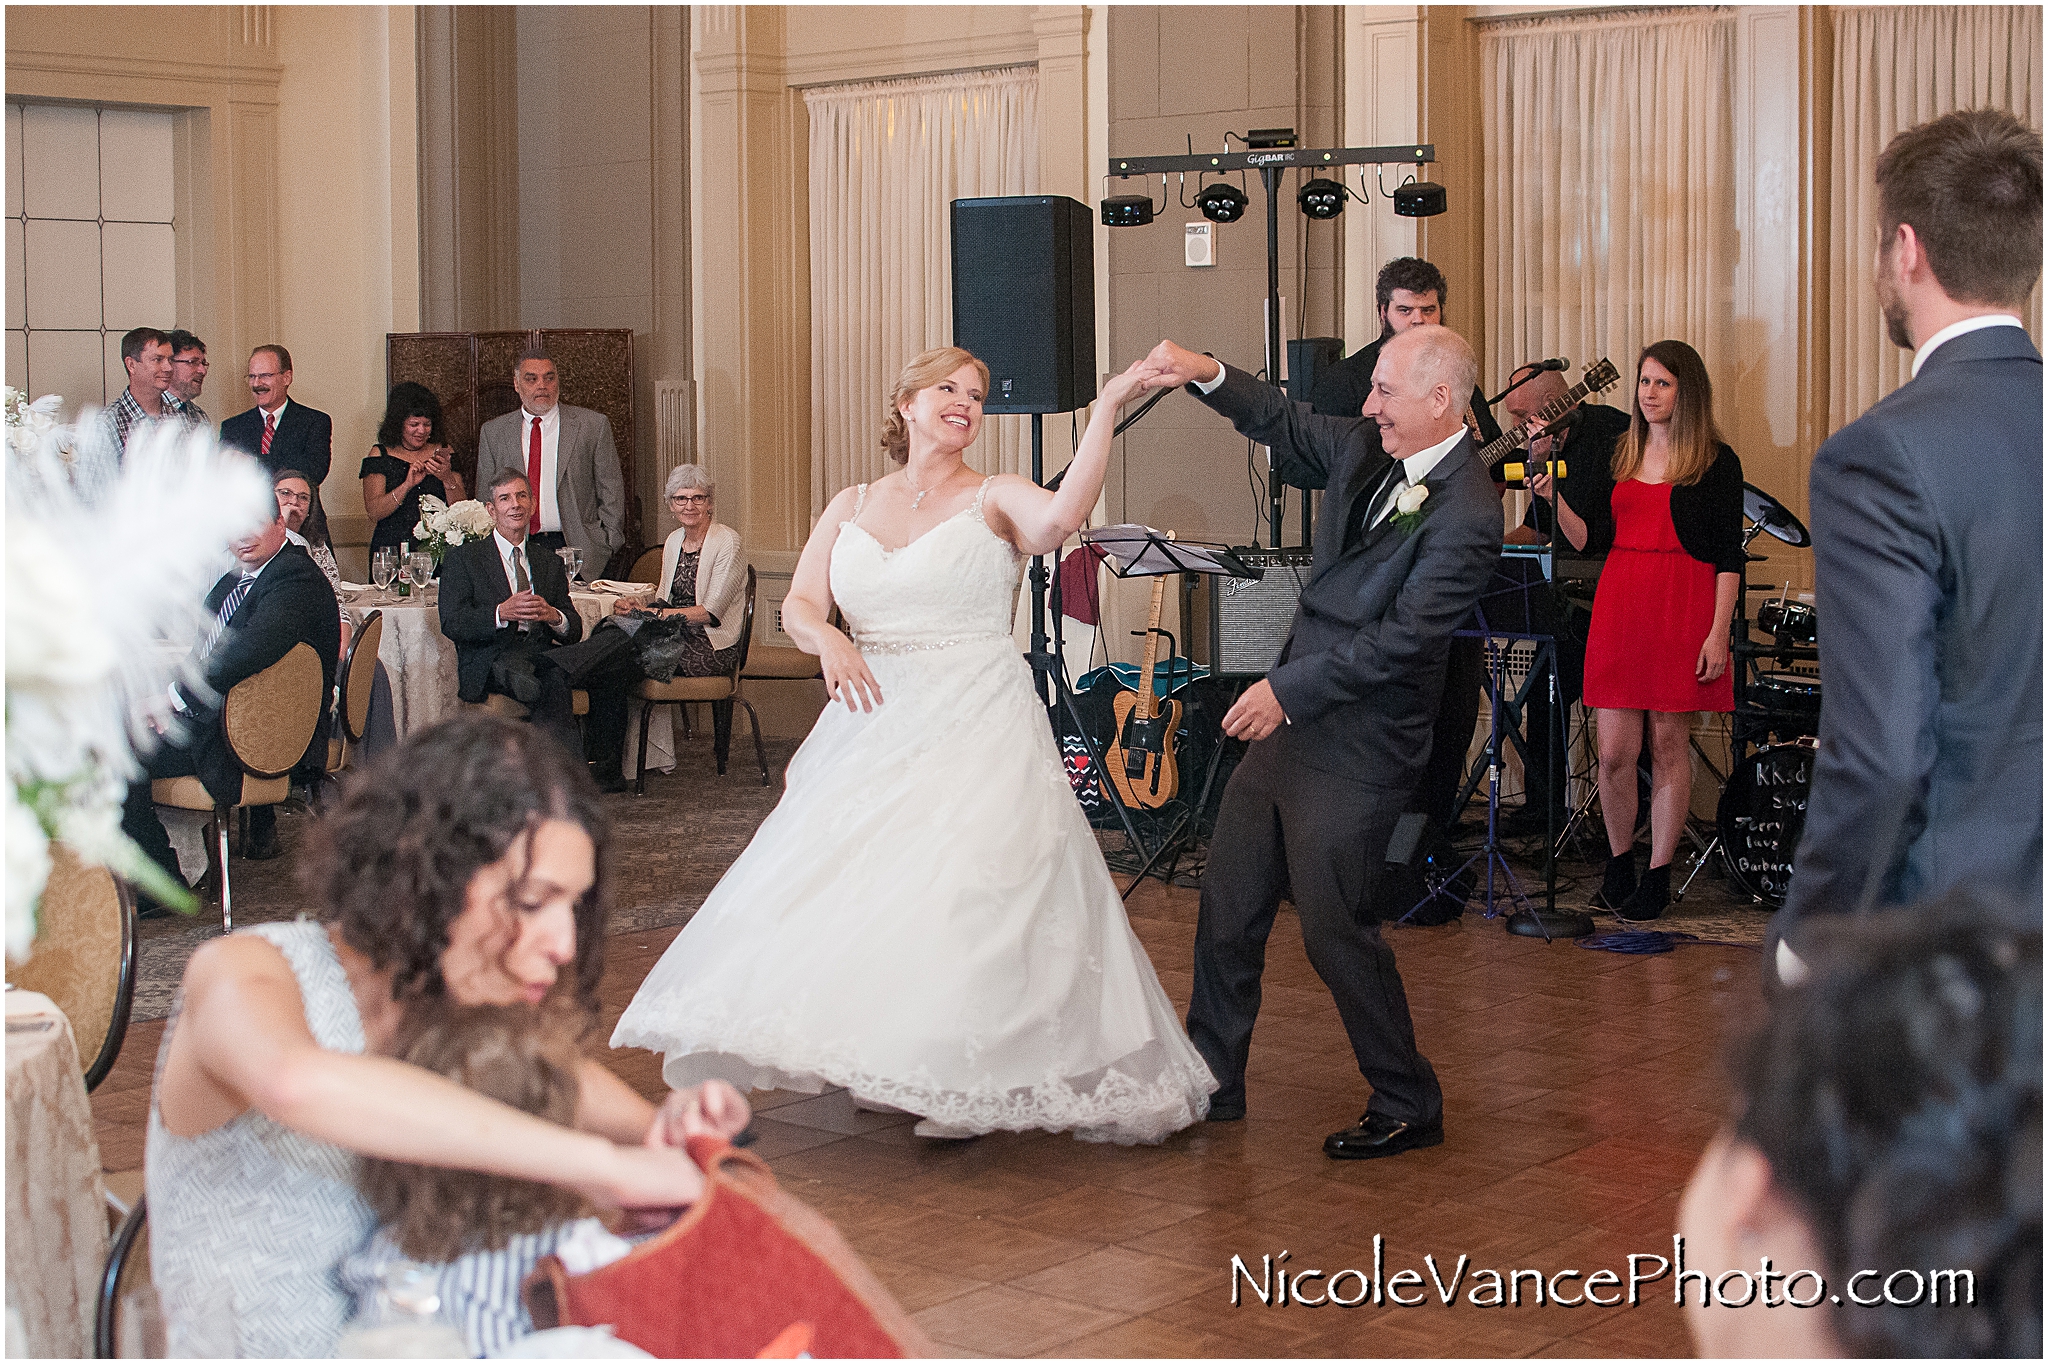 Barbara and Jerry enjoy their first dance at the Hotel John Marshall.